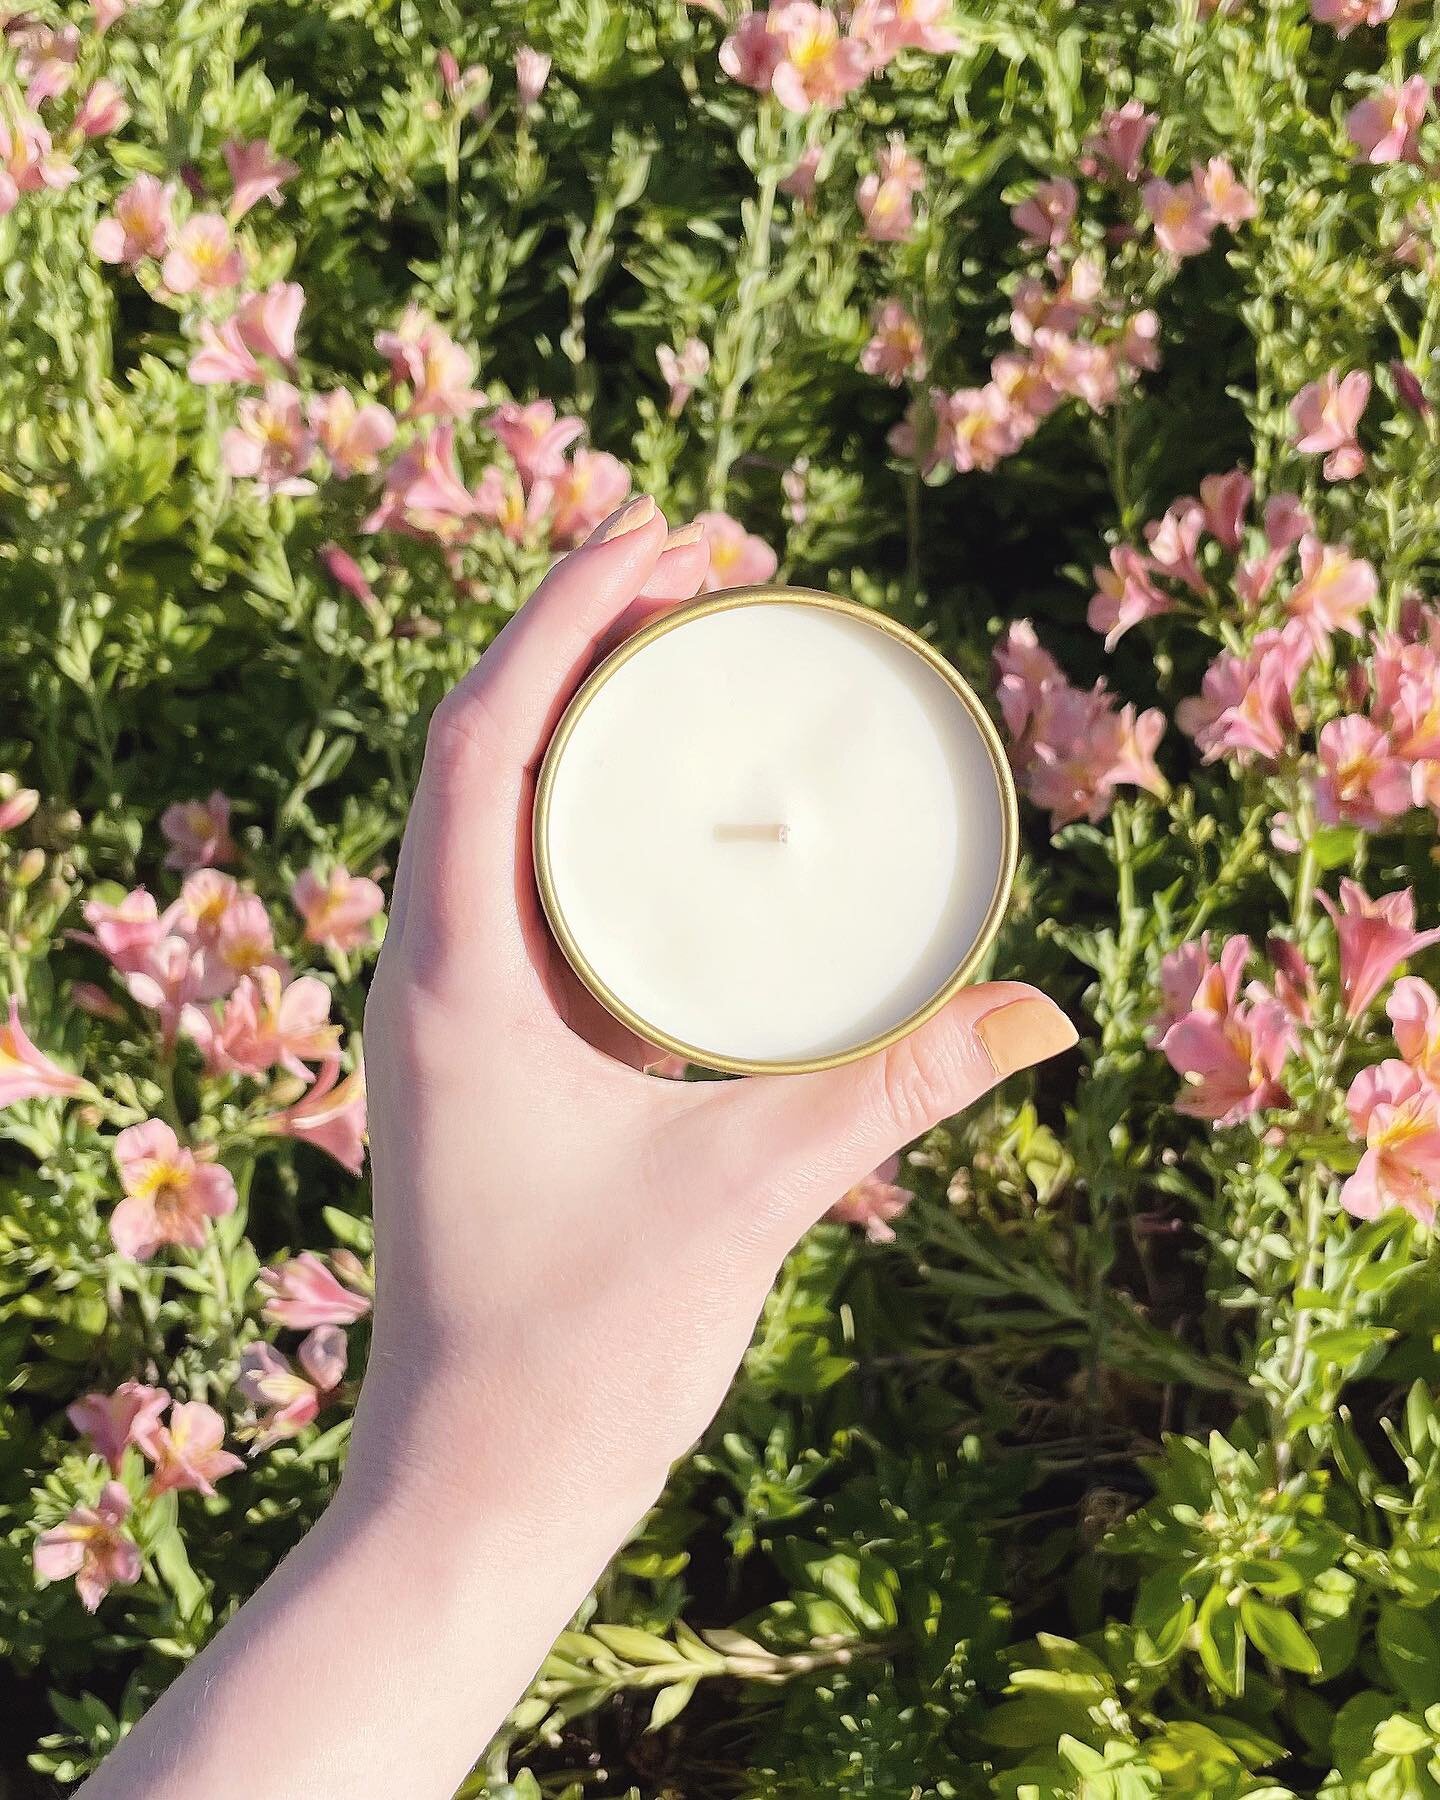 Bloom into springtime with our Spring Equinox candle 🌸🌔

With notes of cherry blossom, gardenia, and sweet clover, this candle smells like a bouquet of fresh florals bursting with sweet nectars and new growth 💐

The Spring Equinox occurs on Tuesda